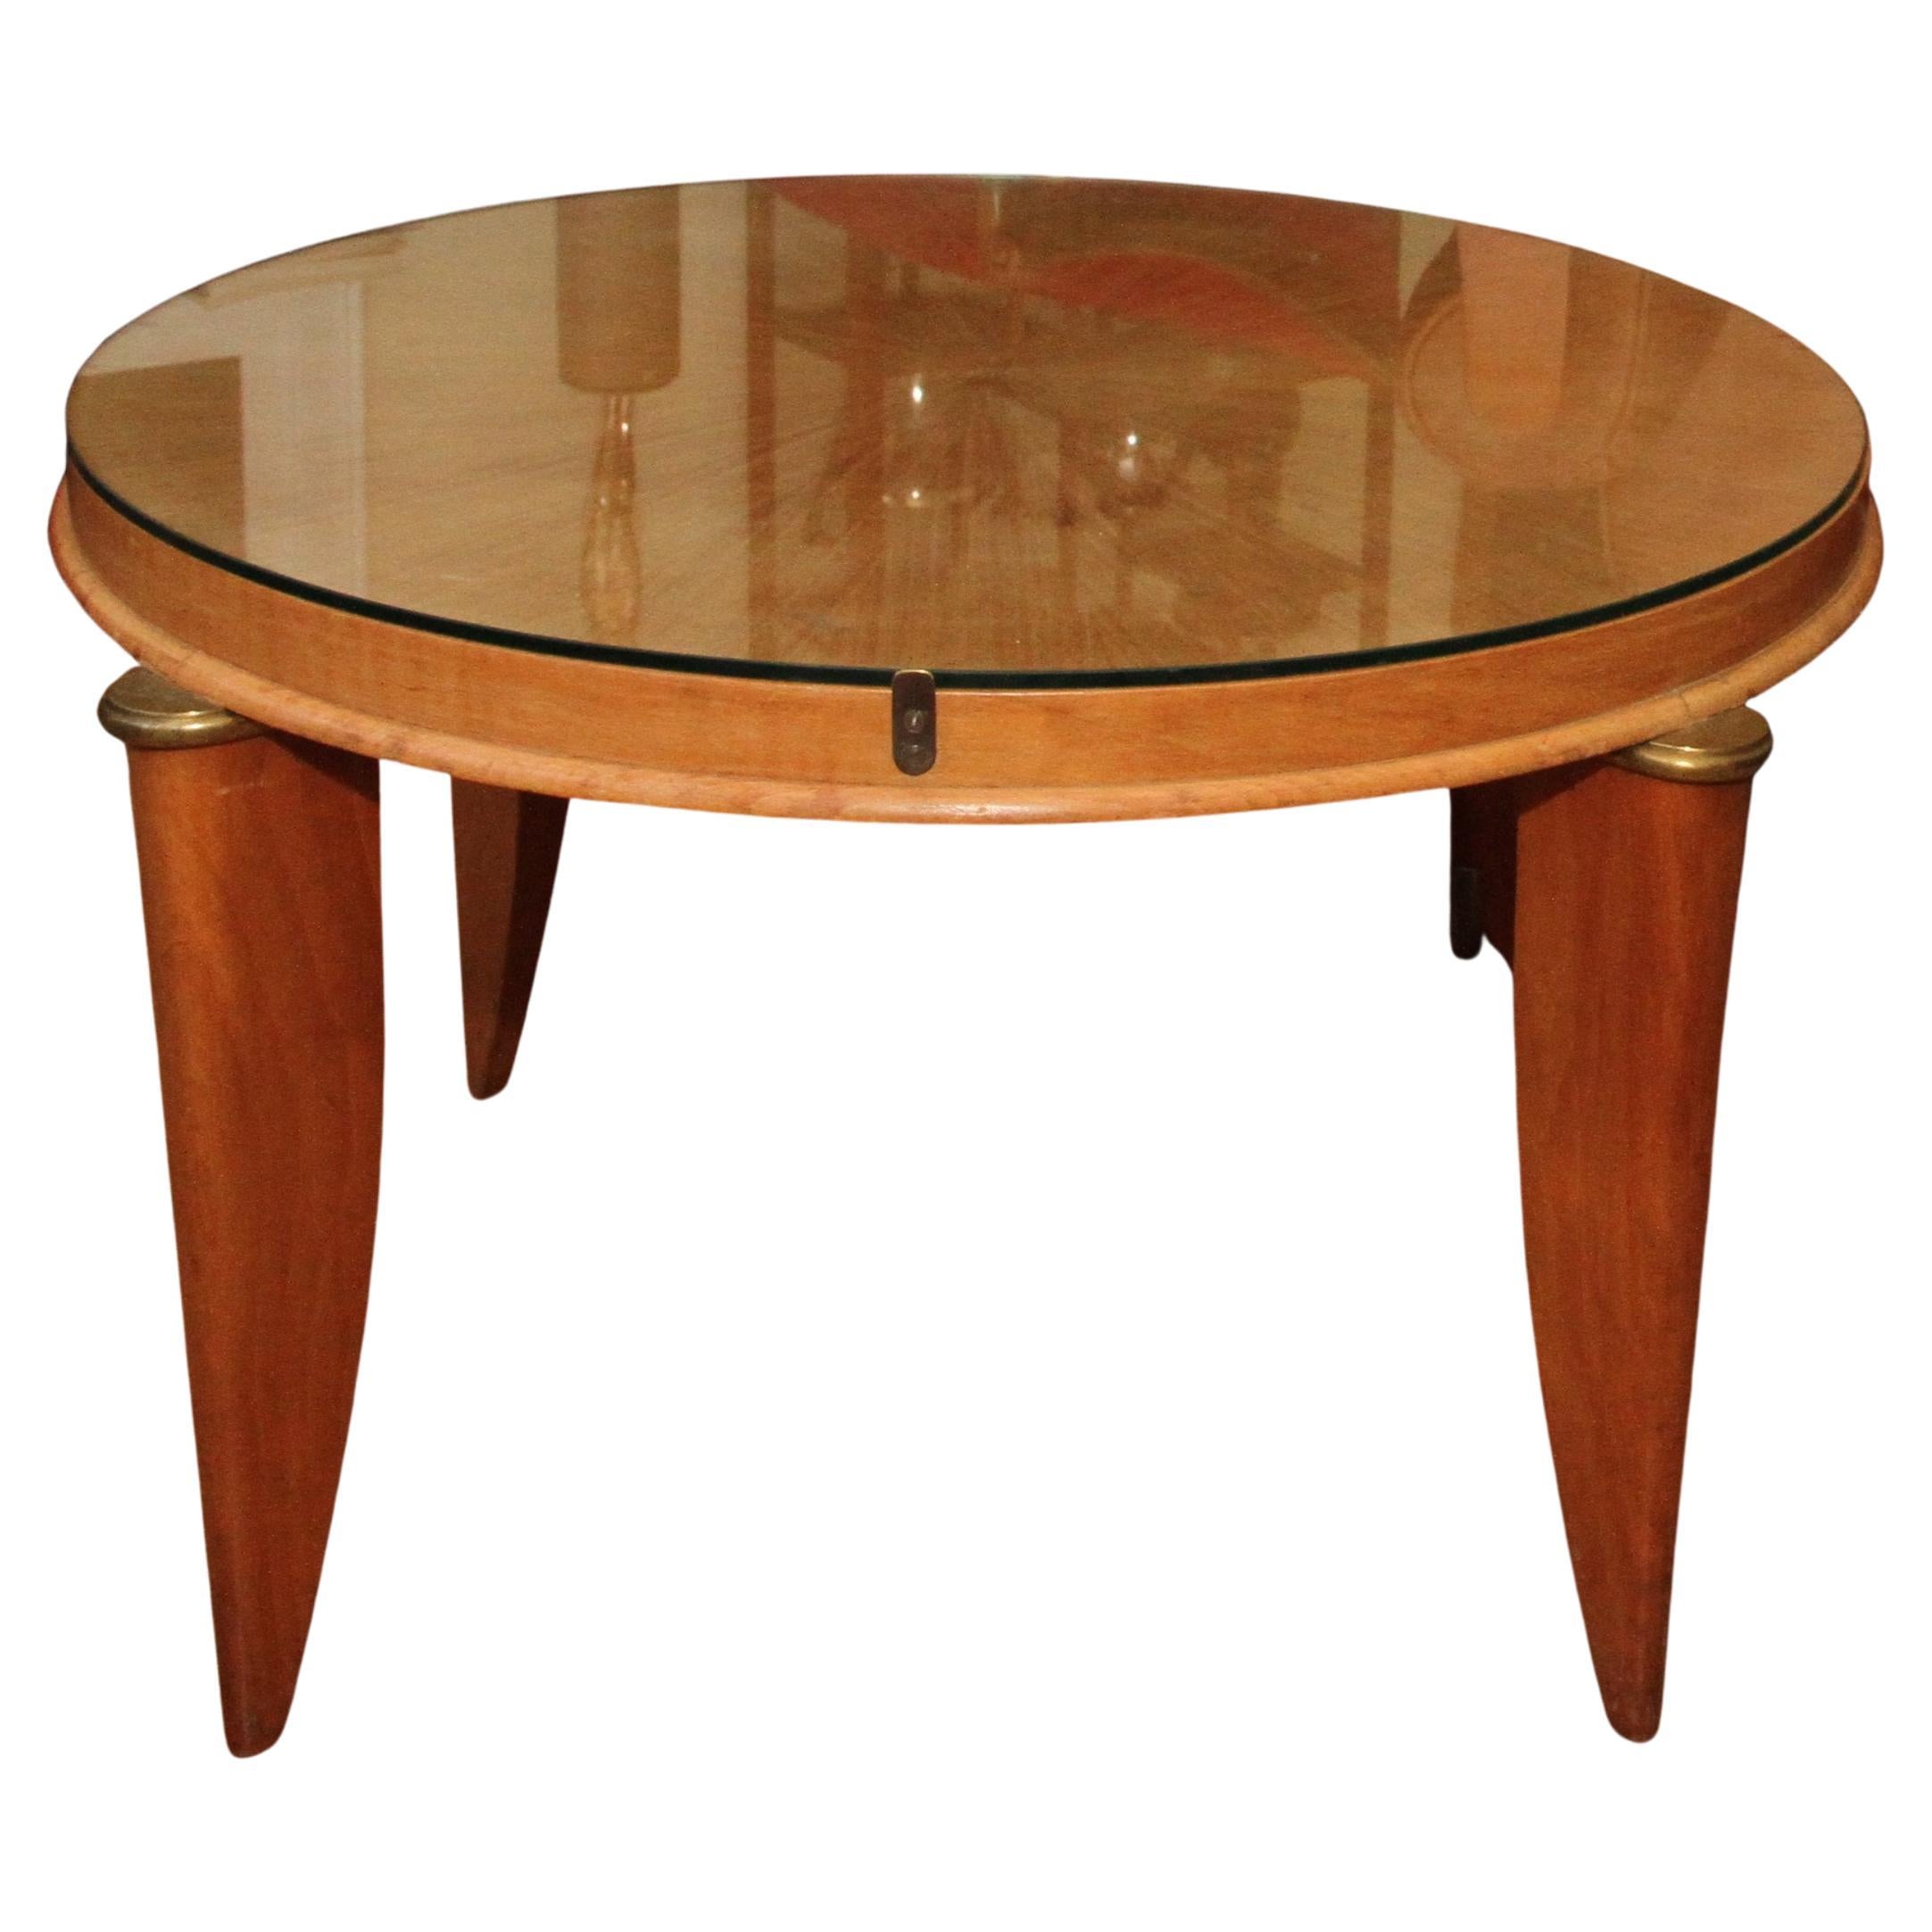 A French Forties Art Deco sycamore occasional side table by Maurice Jallot. For Sale